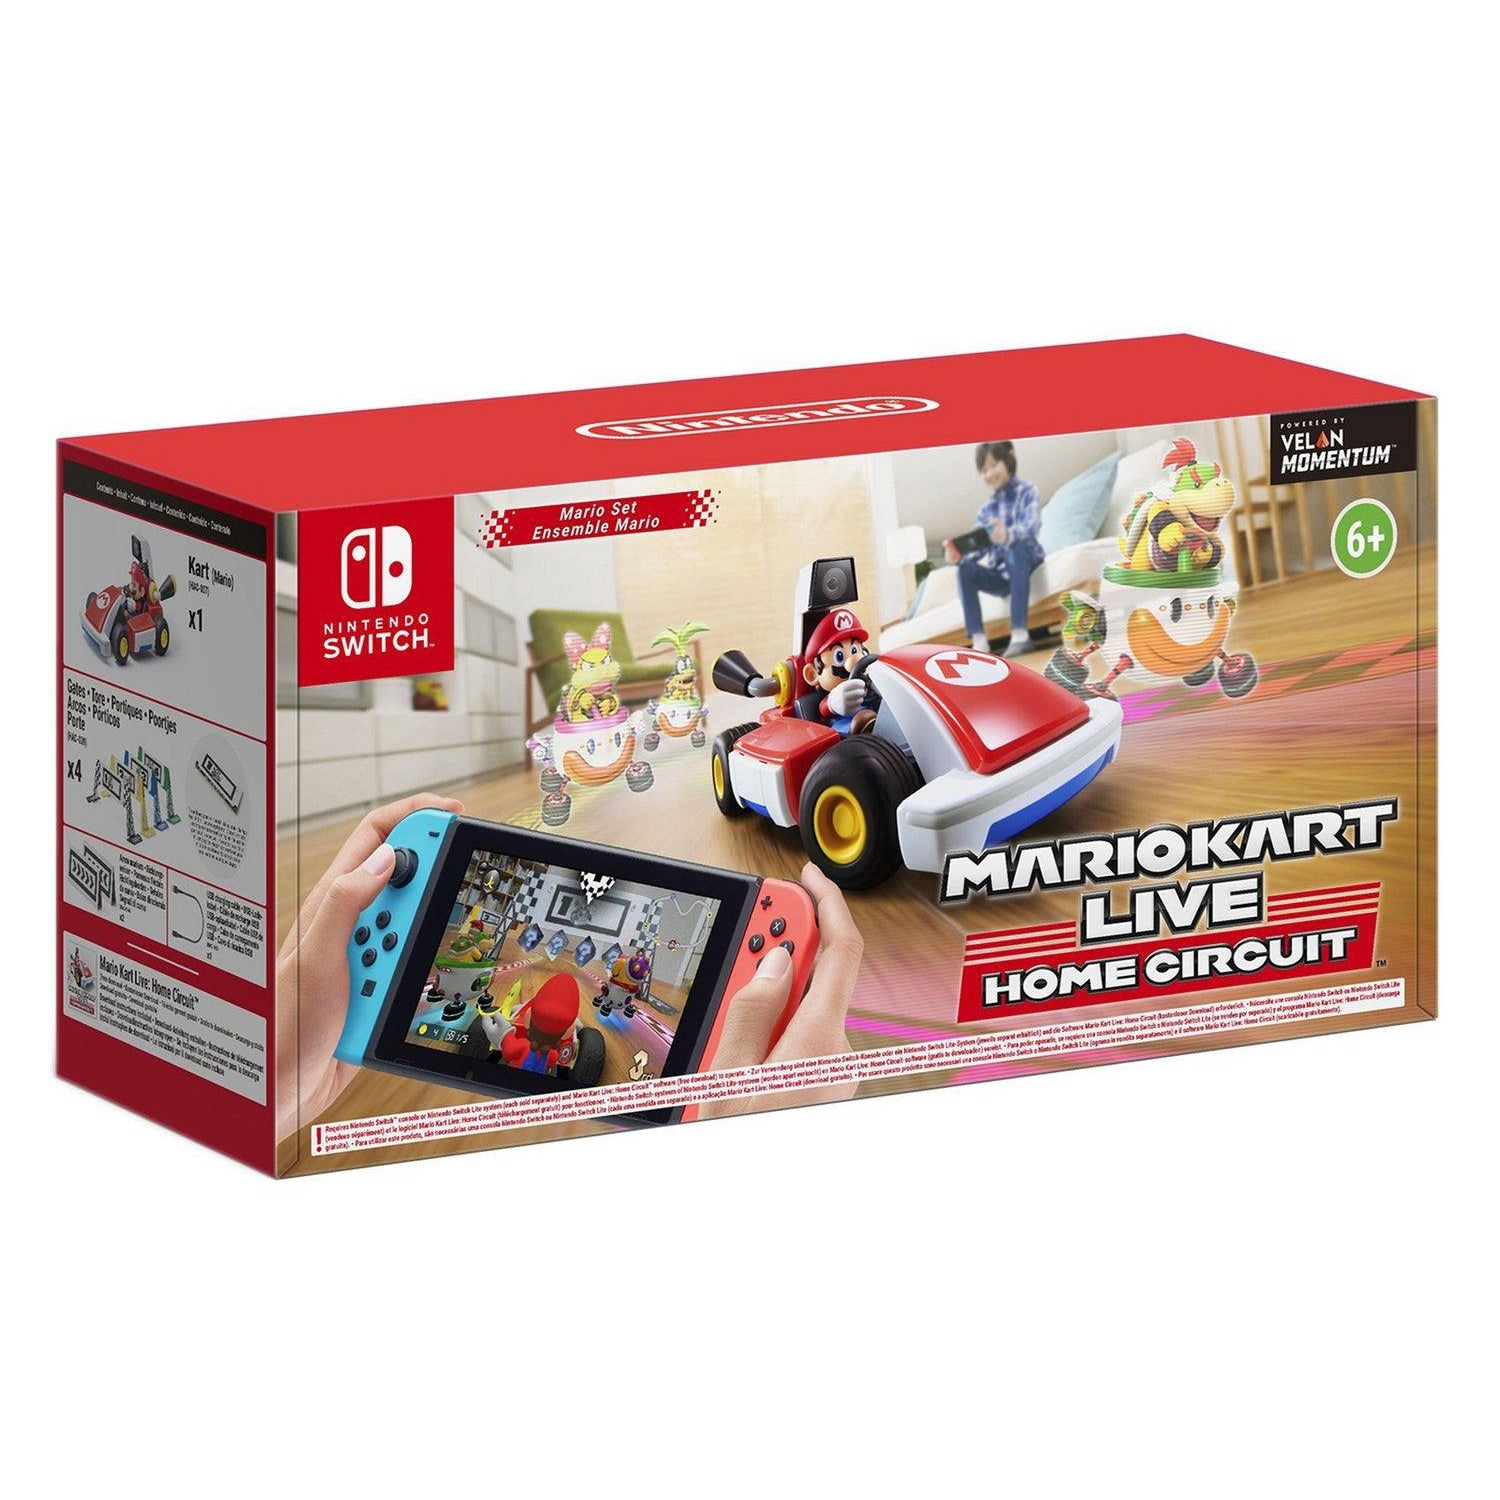 Mario Kart Live Home Circuit Nintendo Switch Game - Refurbished Excellent